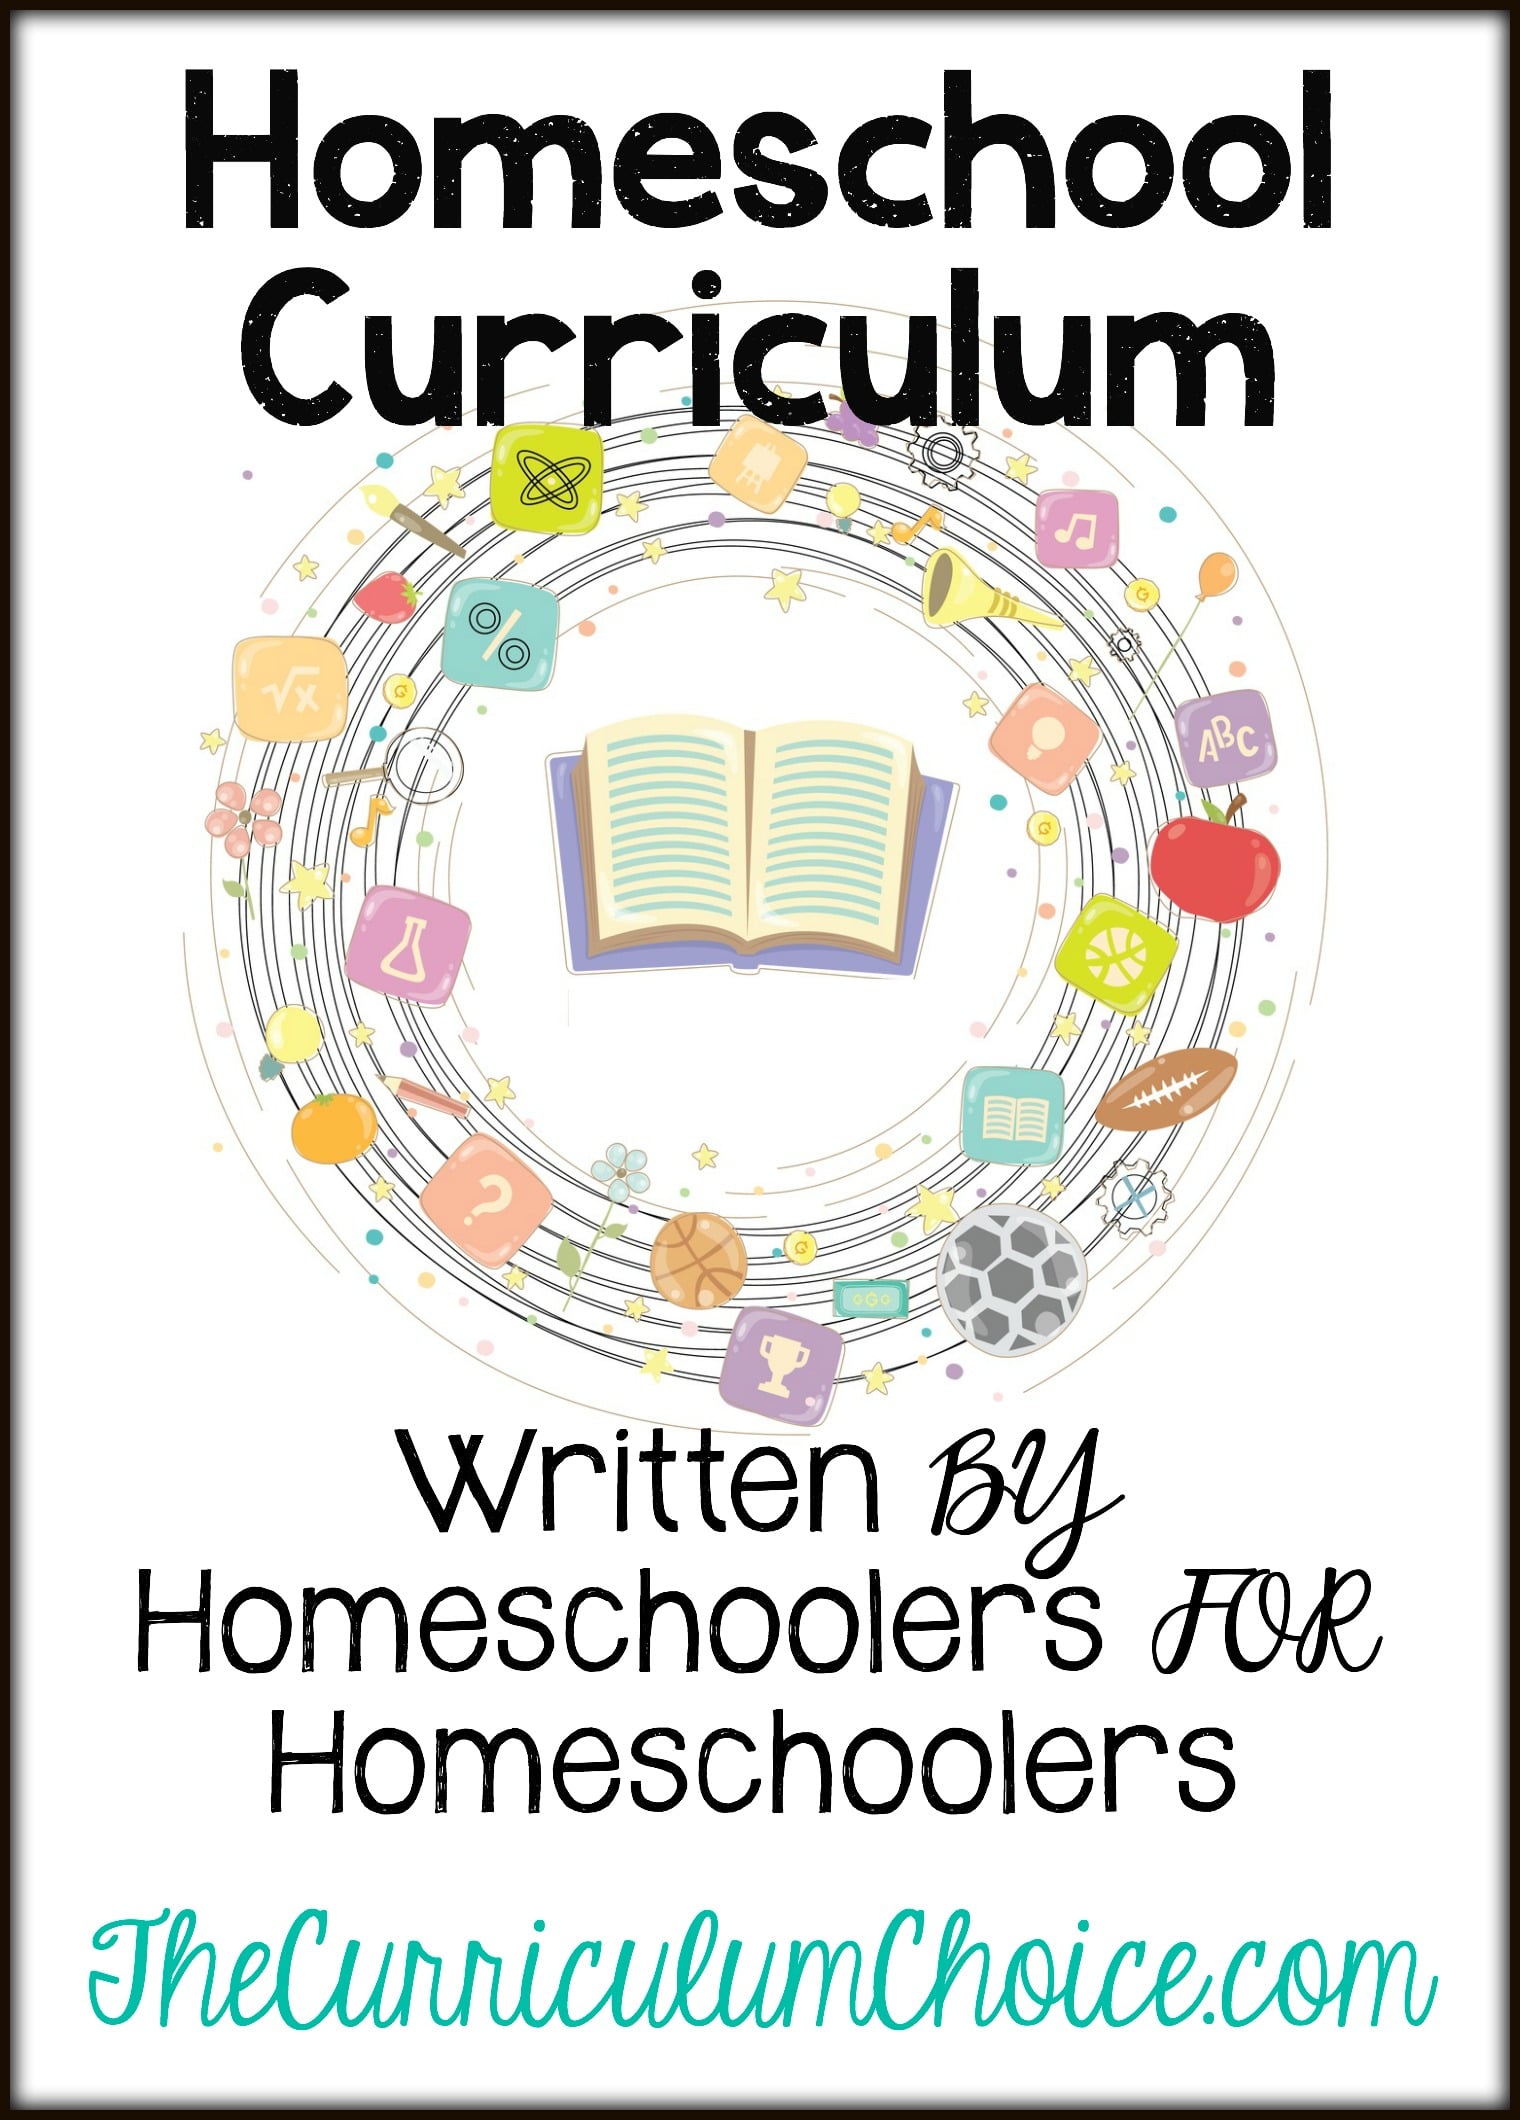 Our Favorite Curriculum By and For Homeschoolers